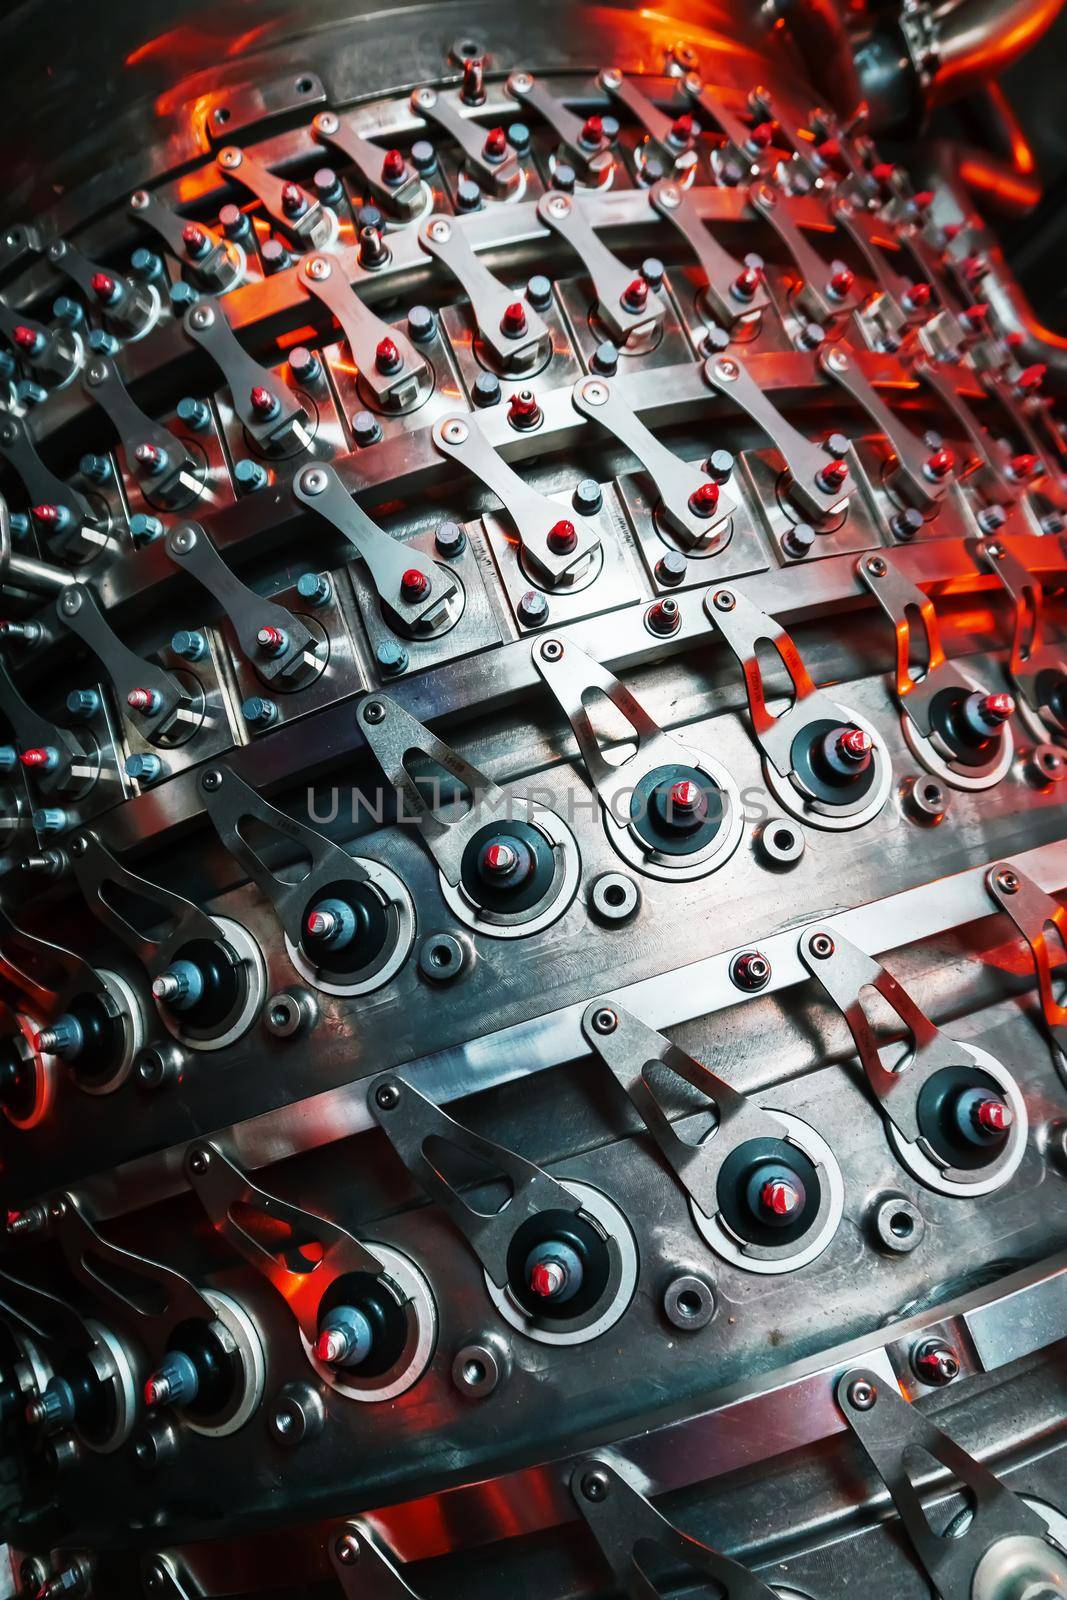 Parts of the operational gas turbine engine of a jet aircraft. Heavy industry and industry. Selective focus